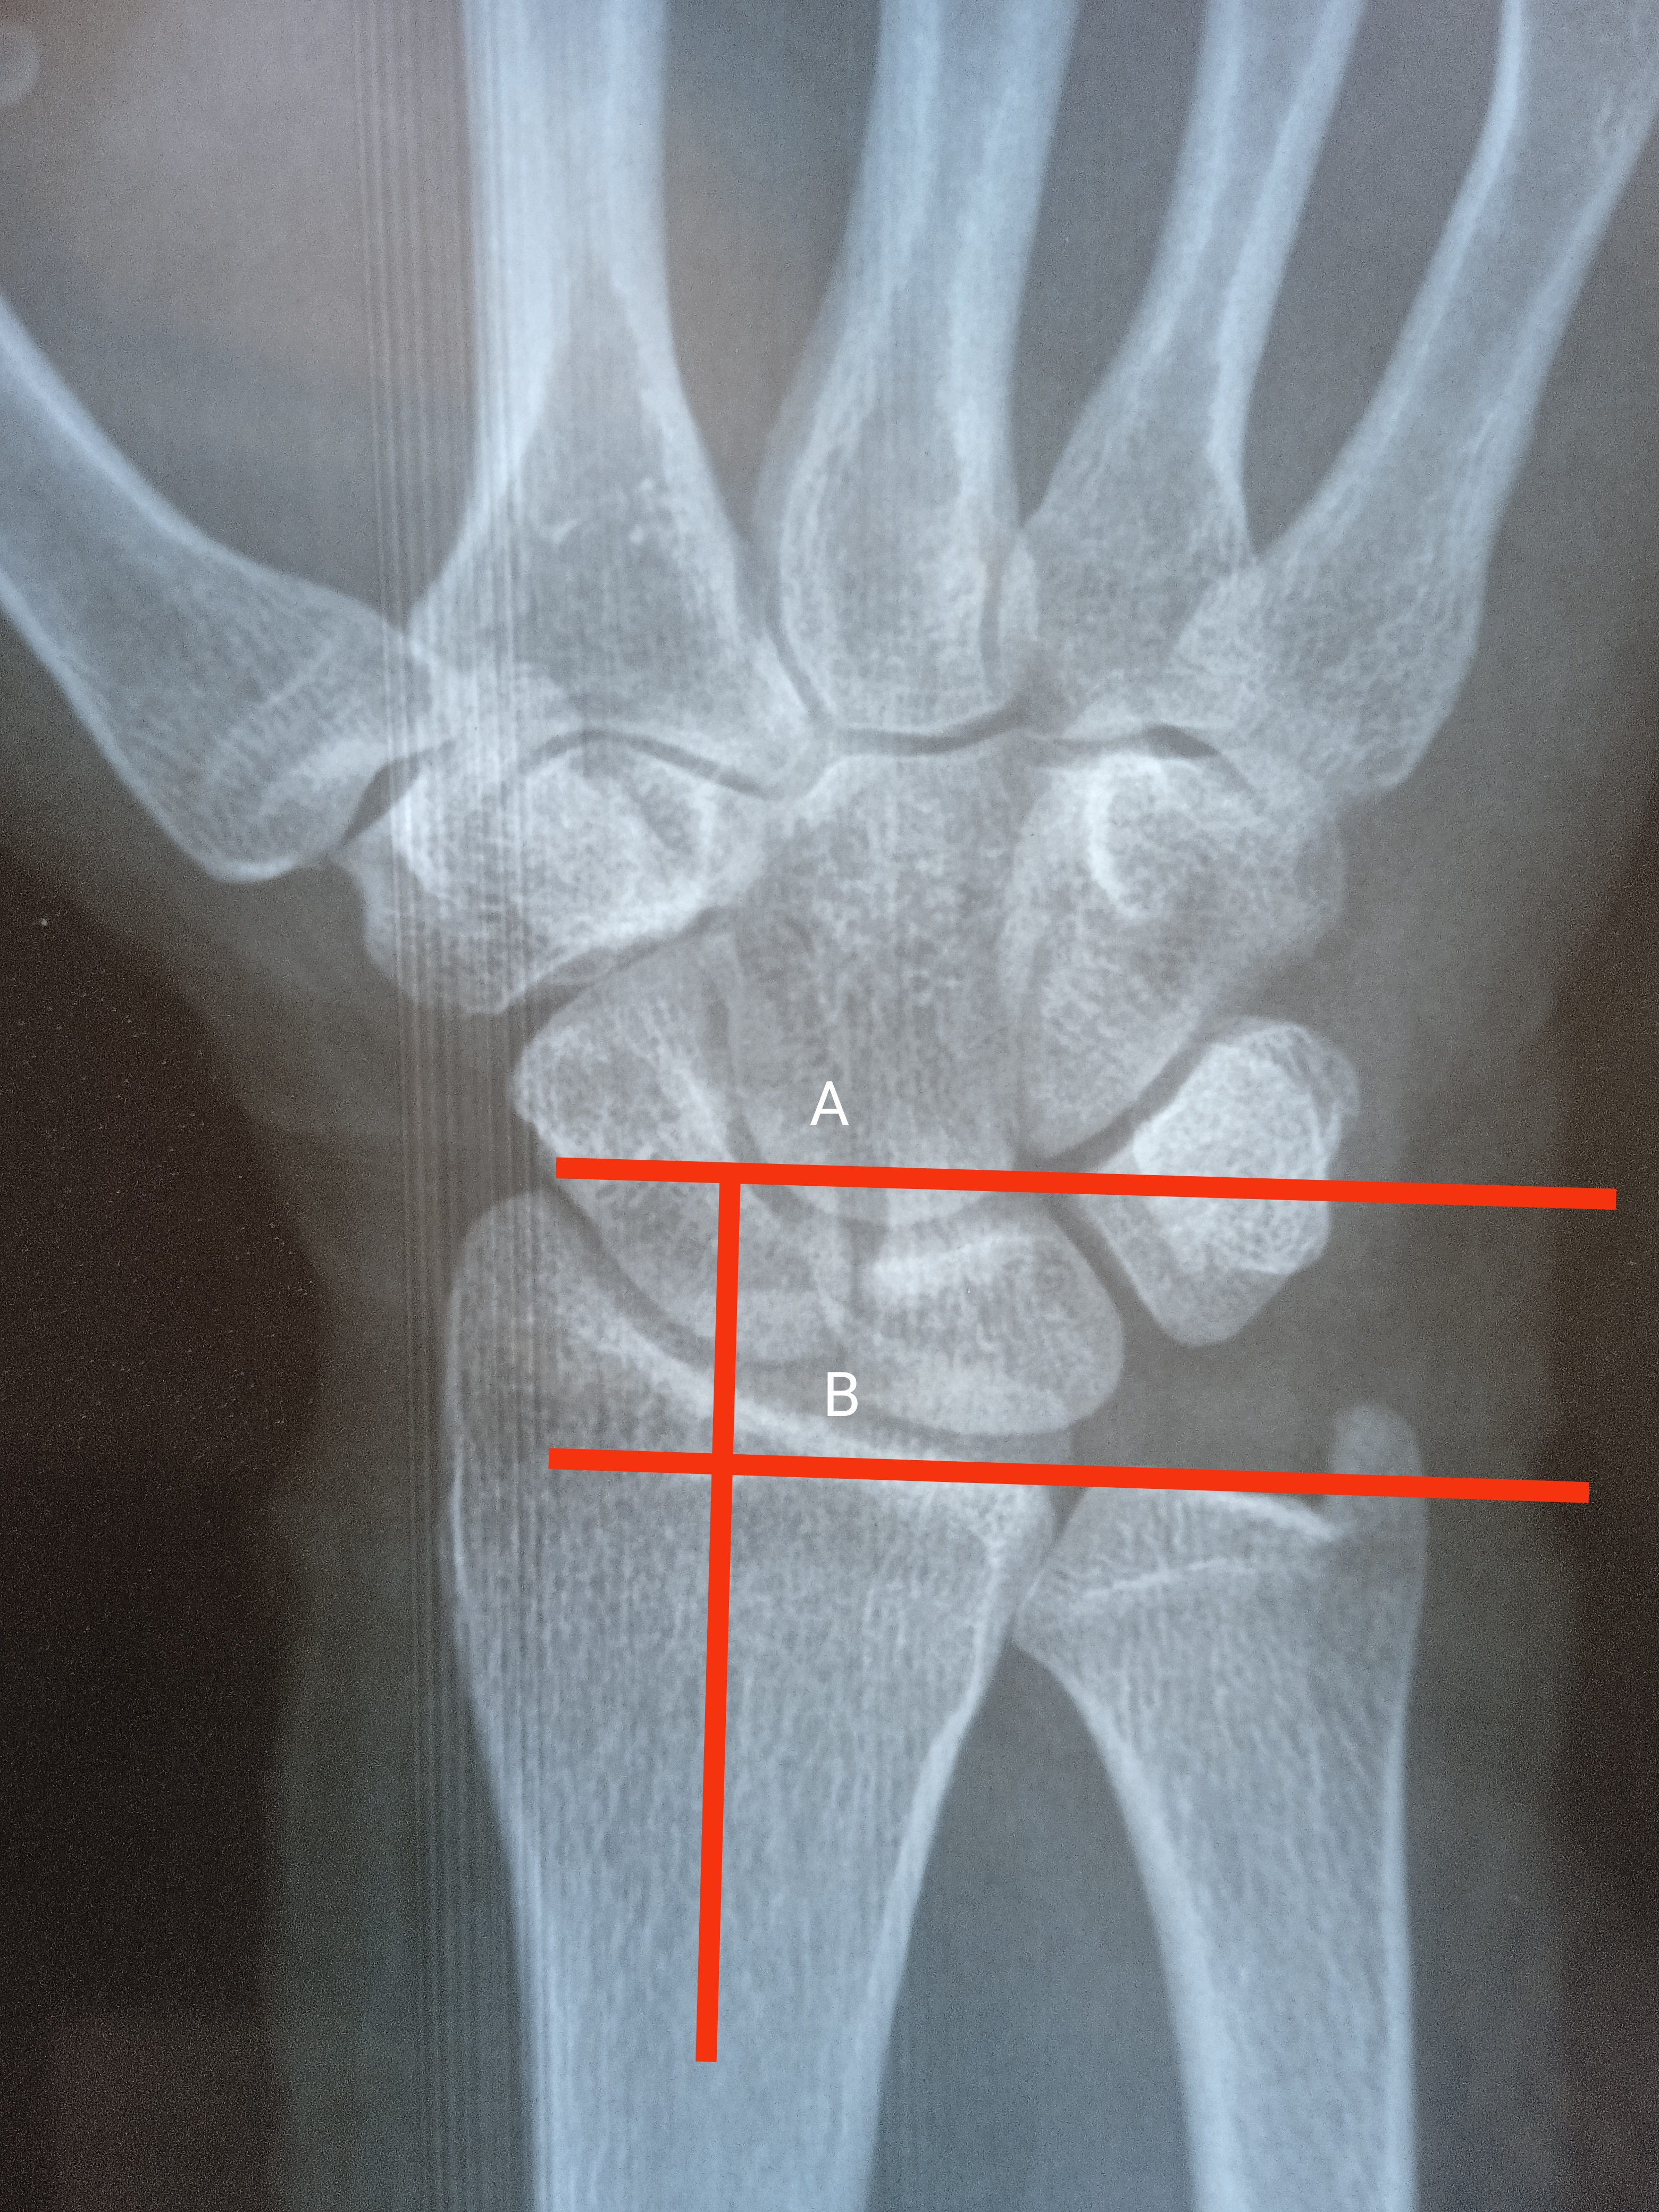 Radial Height:
Both lines are drawn perpendicular to long axis of distal radius